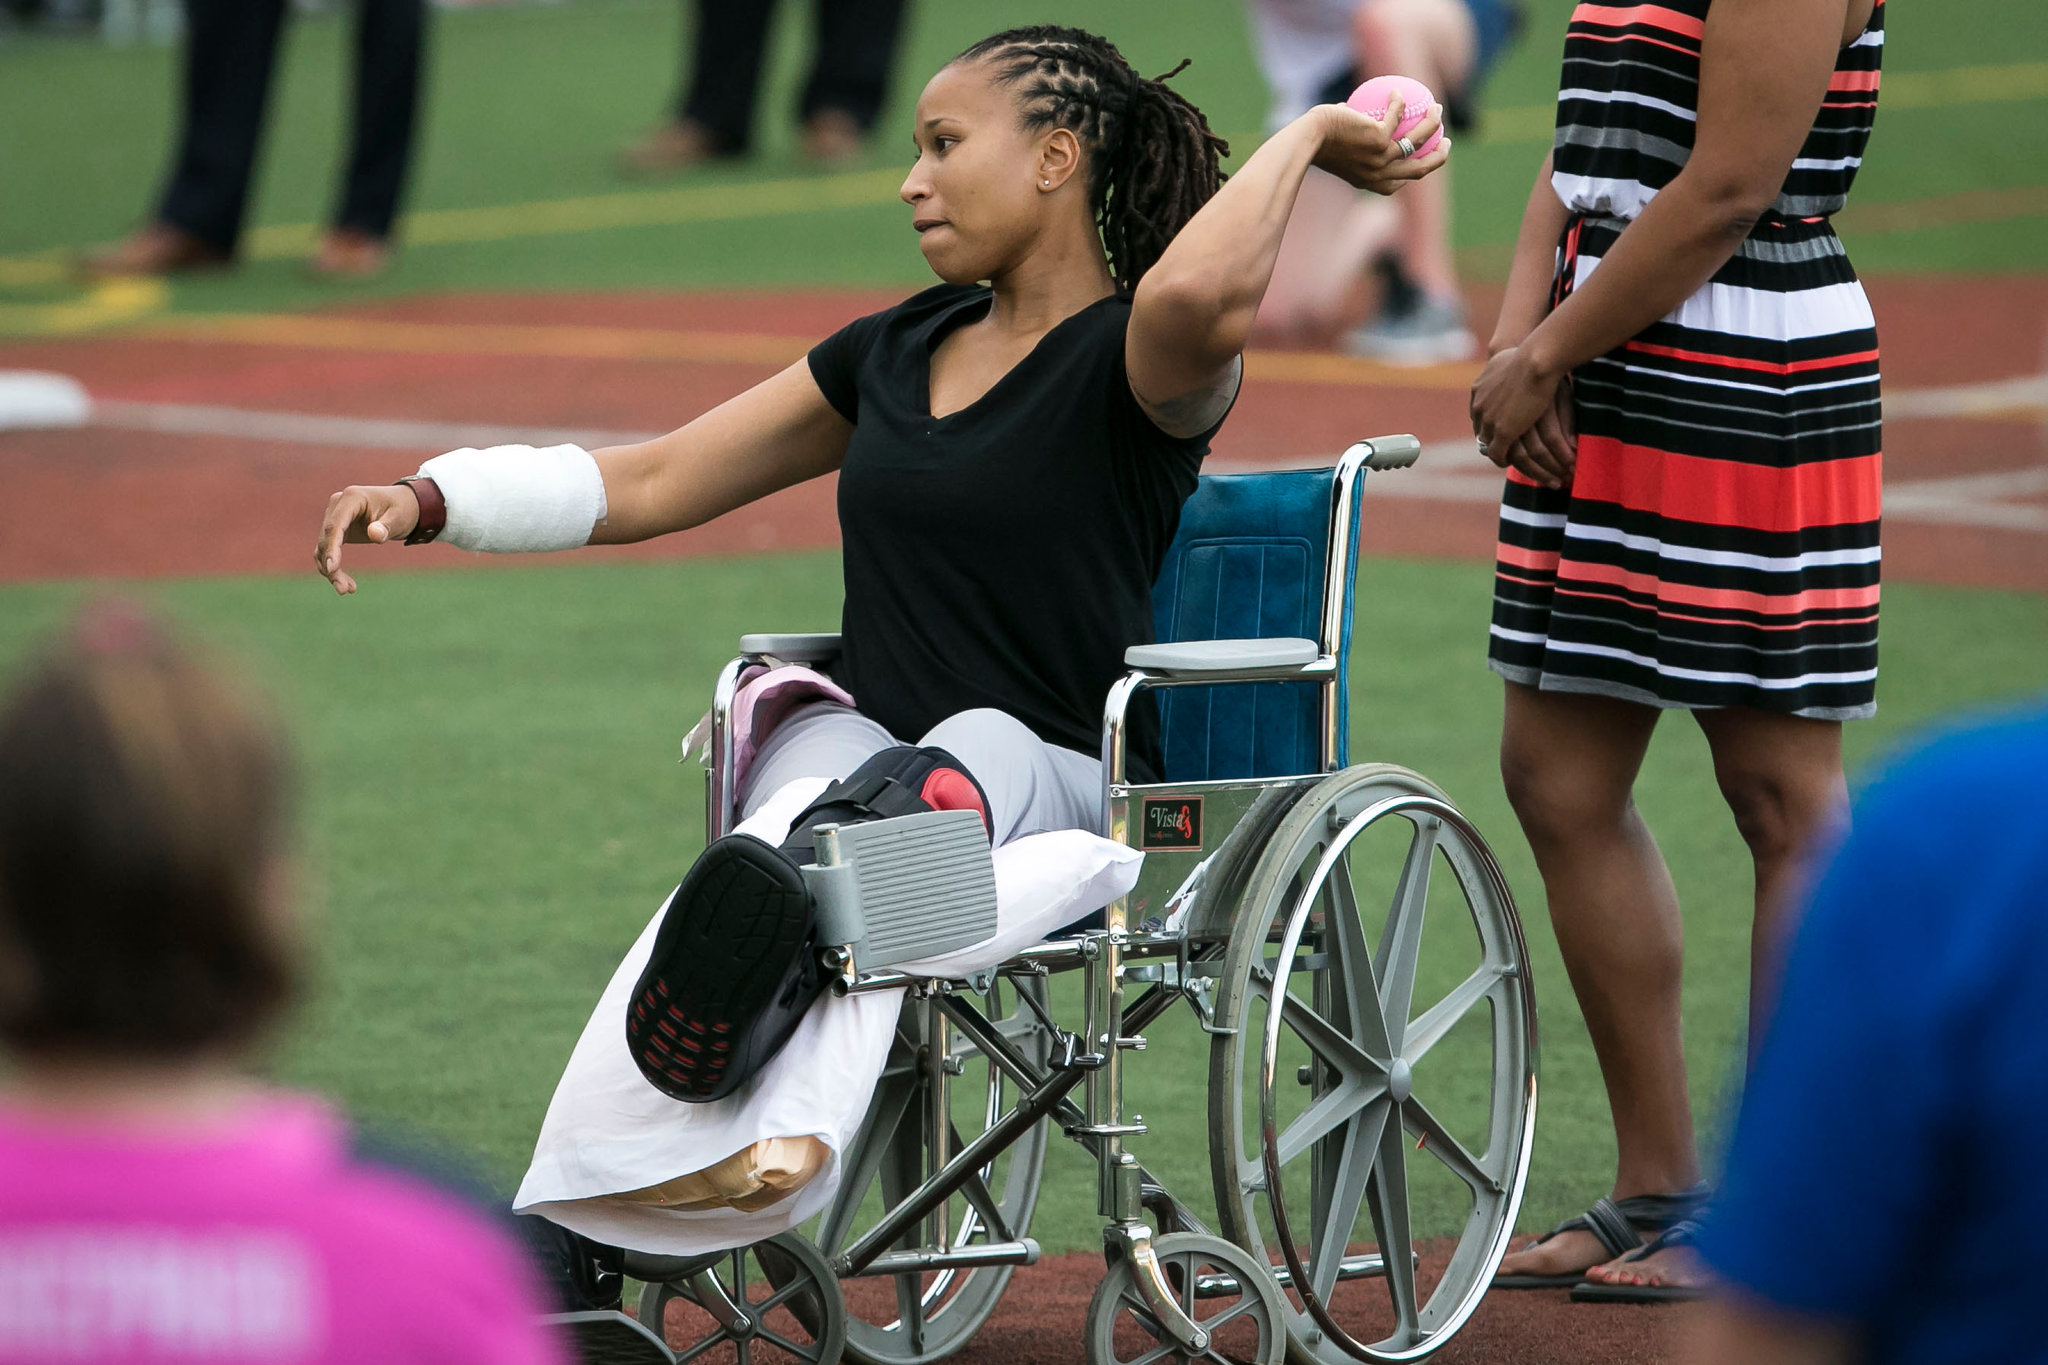 Crystal Griner, a Capitol Police officer injured in last week’s shooting at a congressional baseball practice, threw the first pitch at the annual Congressional Women’s Softball Game in Washington on Wednesday. (Photo: Al Drago/The New York Times)